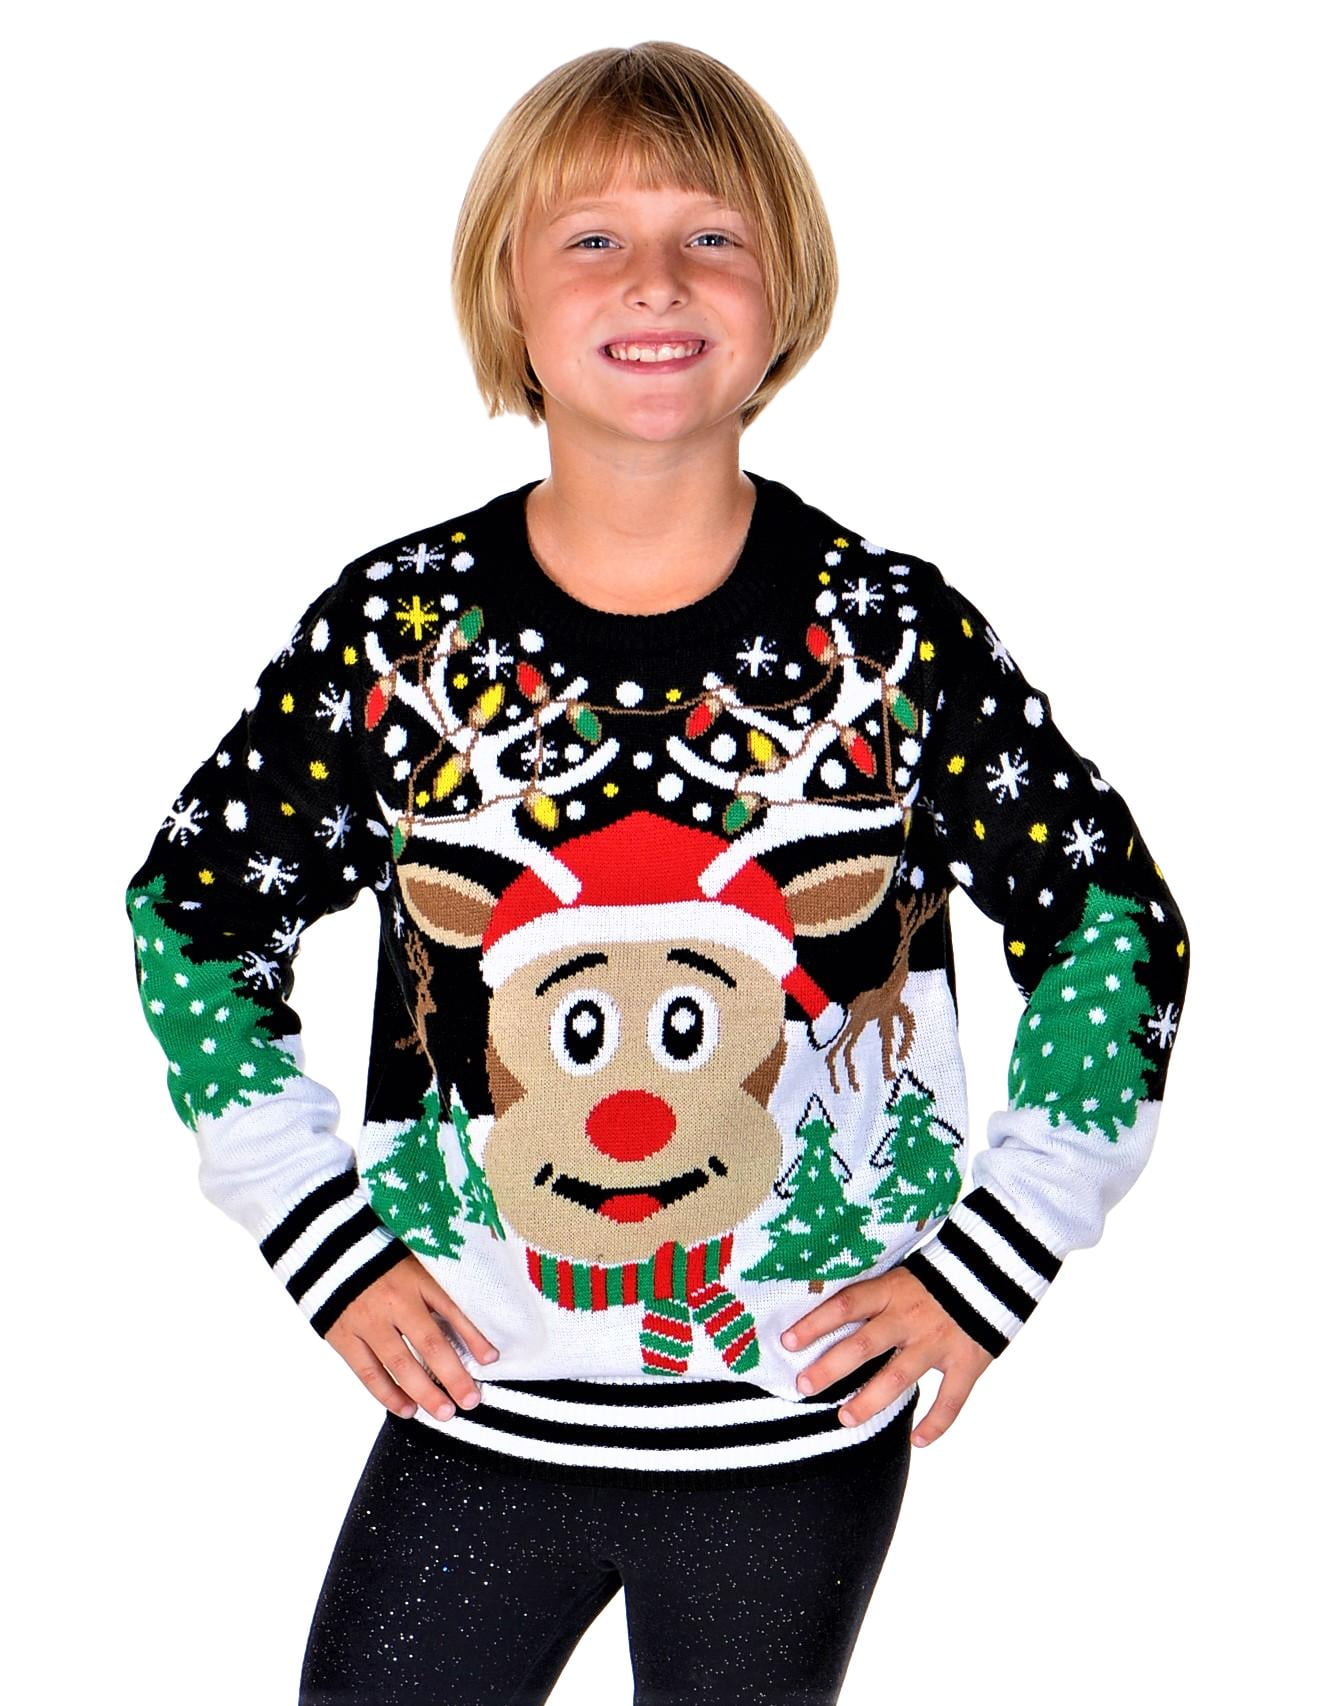 SoCal Look Girls Ugly Christmas Sweater Rudolph The Red Nose Pullover Black